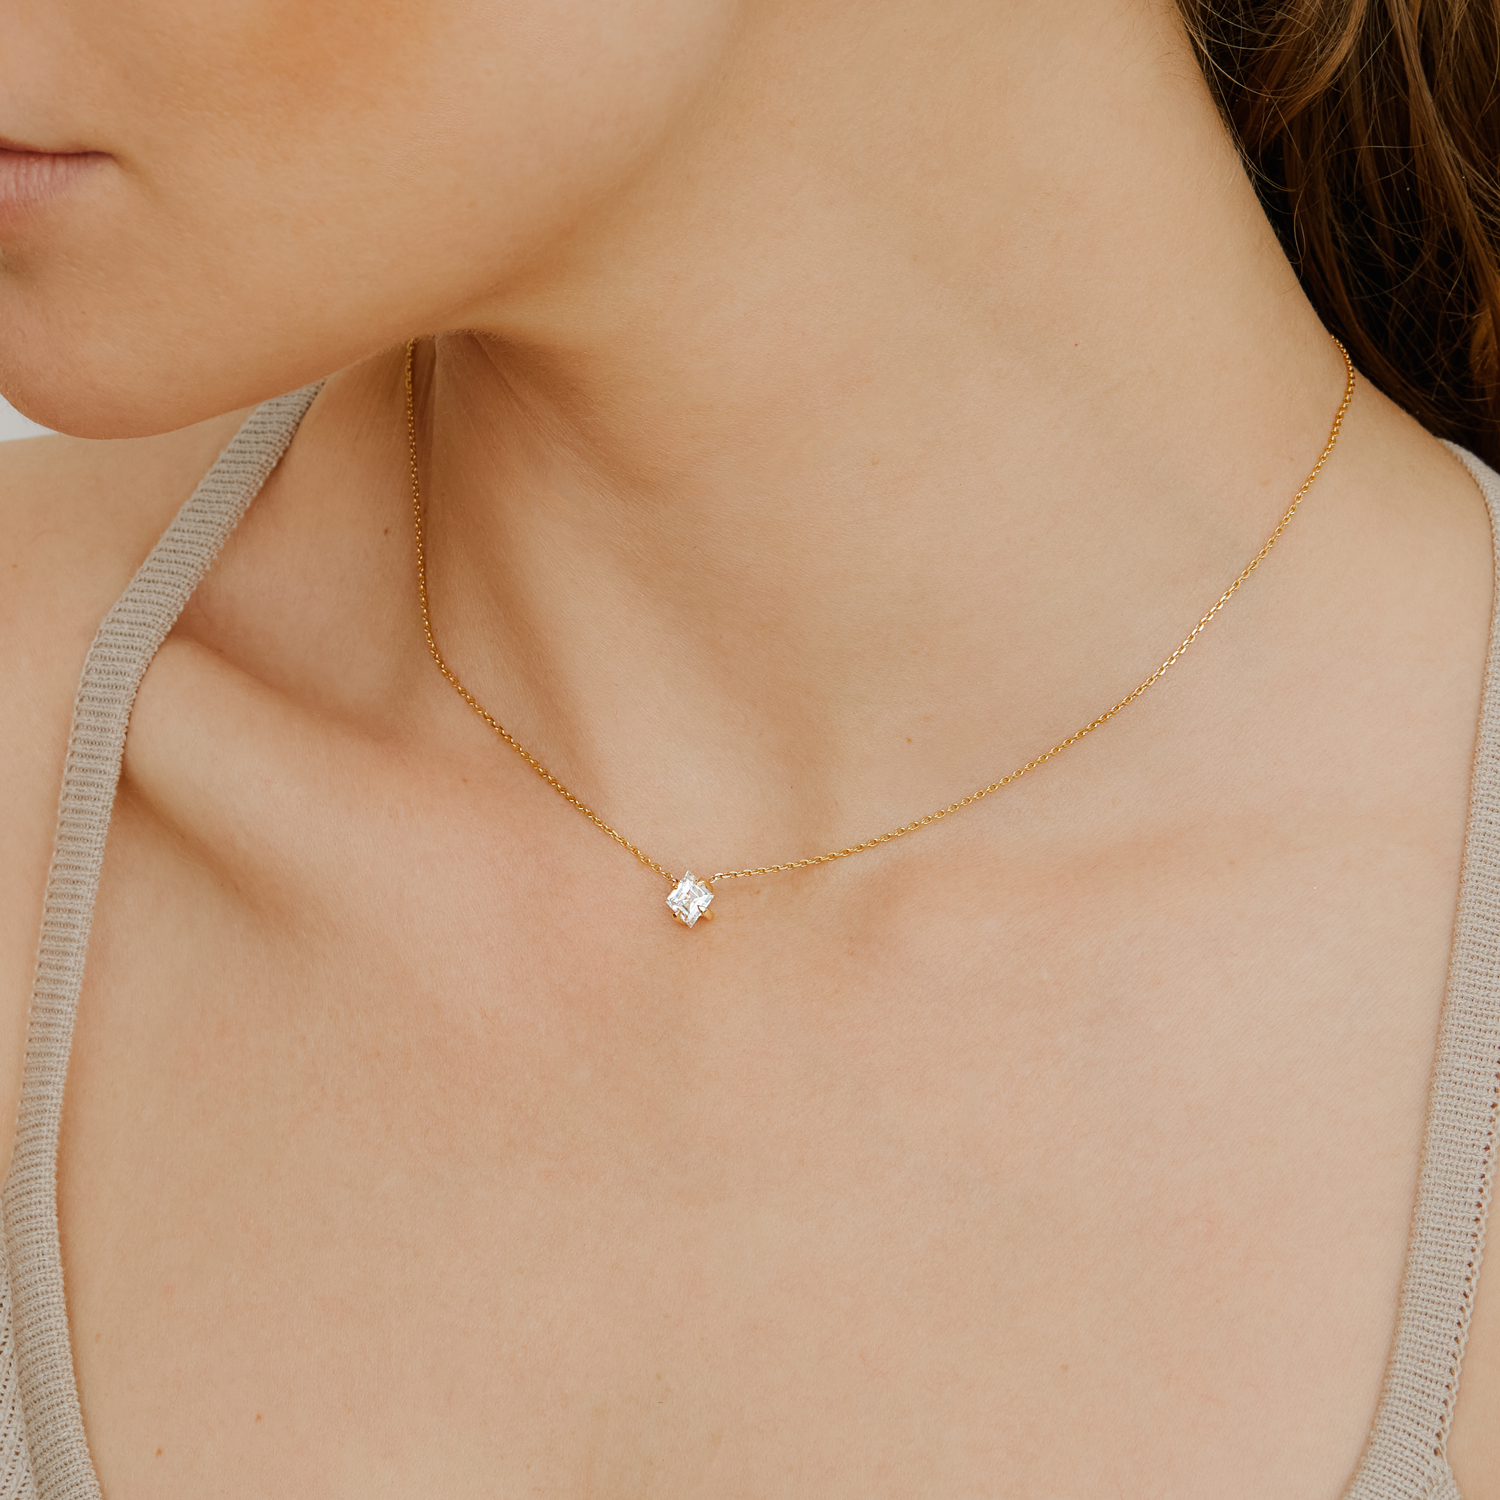 Fine Jewelry Layered Necklace on Sale, 52% OFF | campingcanyelles.com